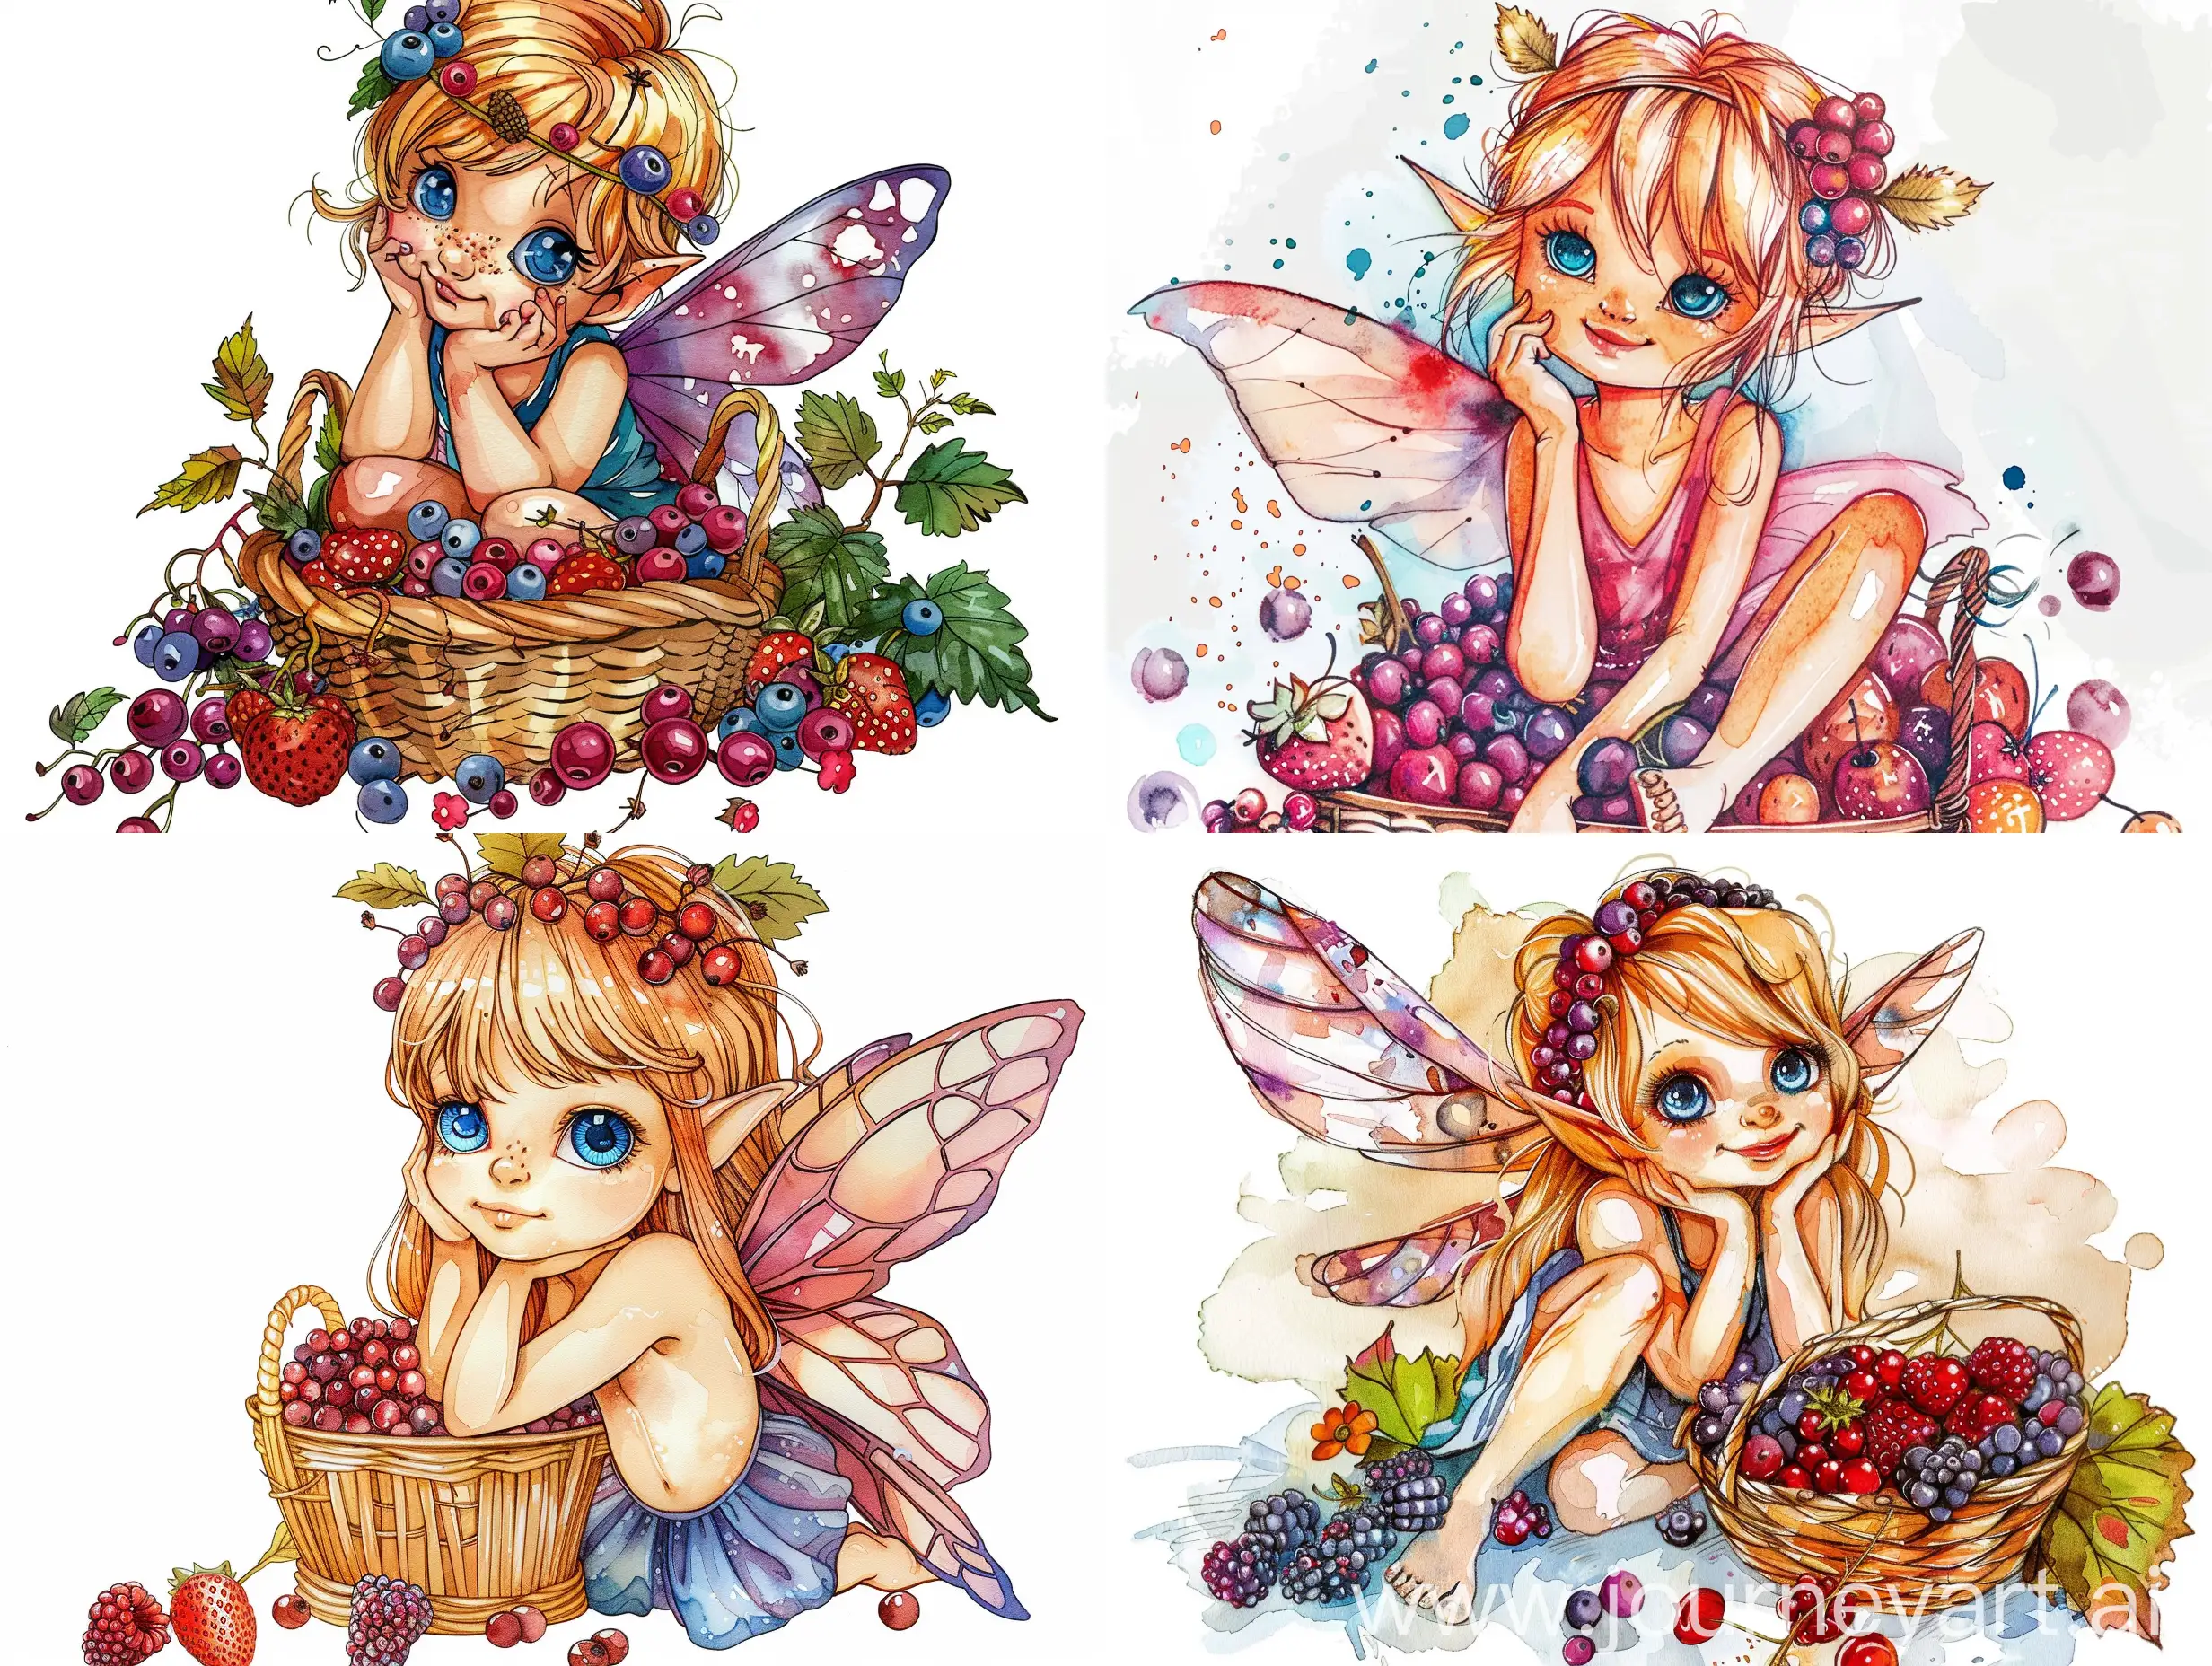 mix illustration alcohol ink, thin line and watercolor, a little fairy with burn sienna blonde hair and blue eyes berries fruits headband, one hand holds the chin sitting on a basket full of berries fruits, adorable cute cartoon with big eyes, isolated on white background